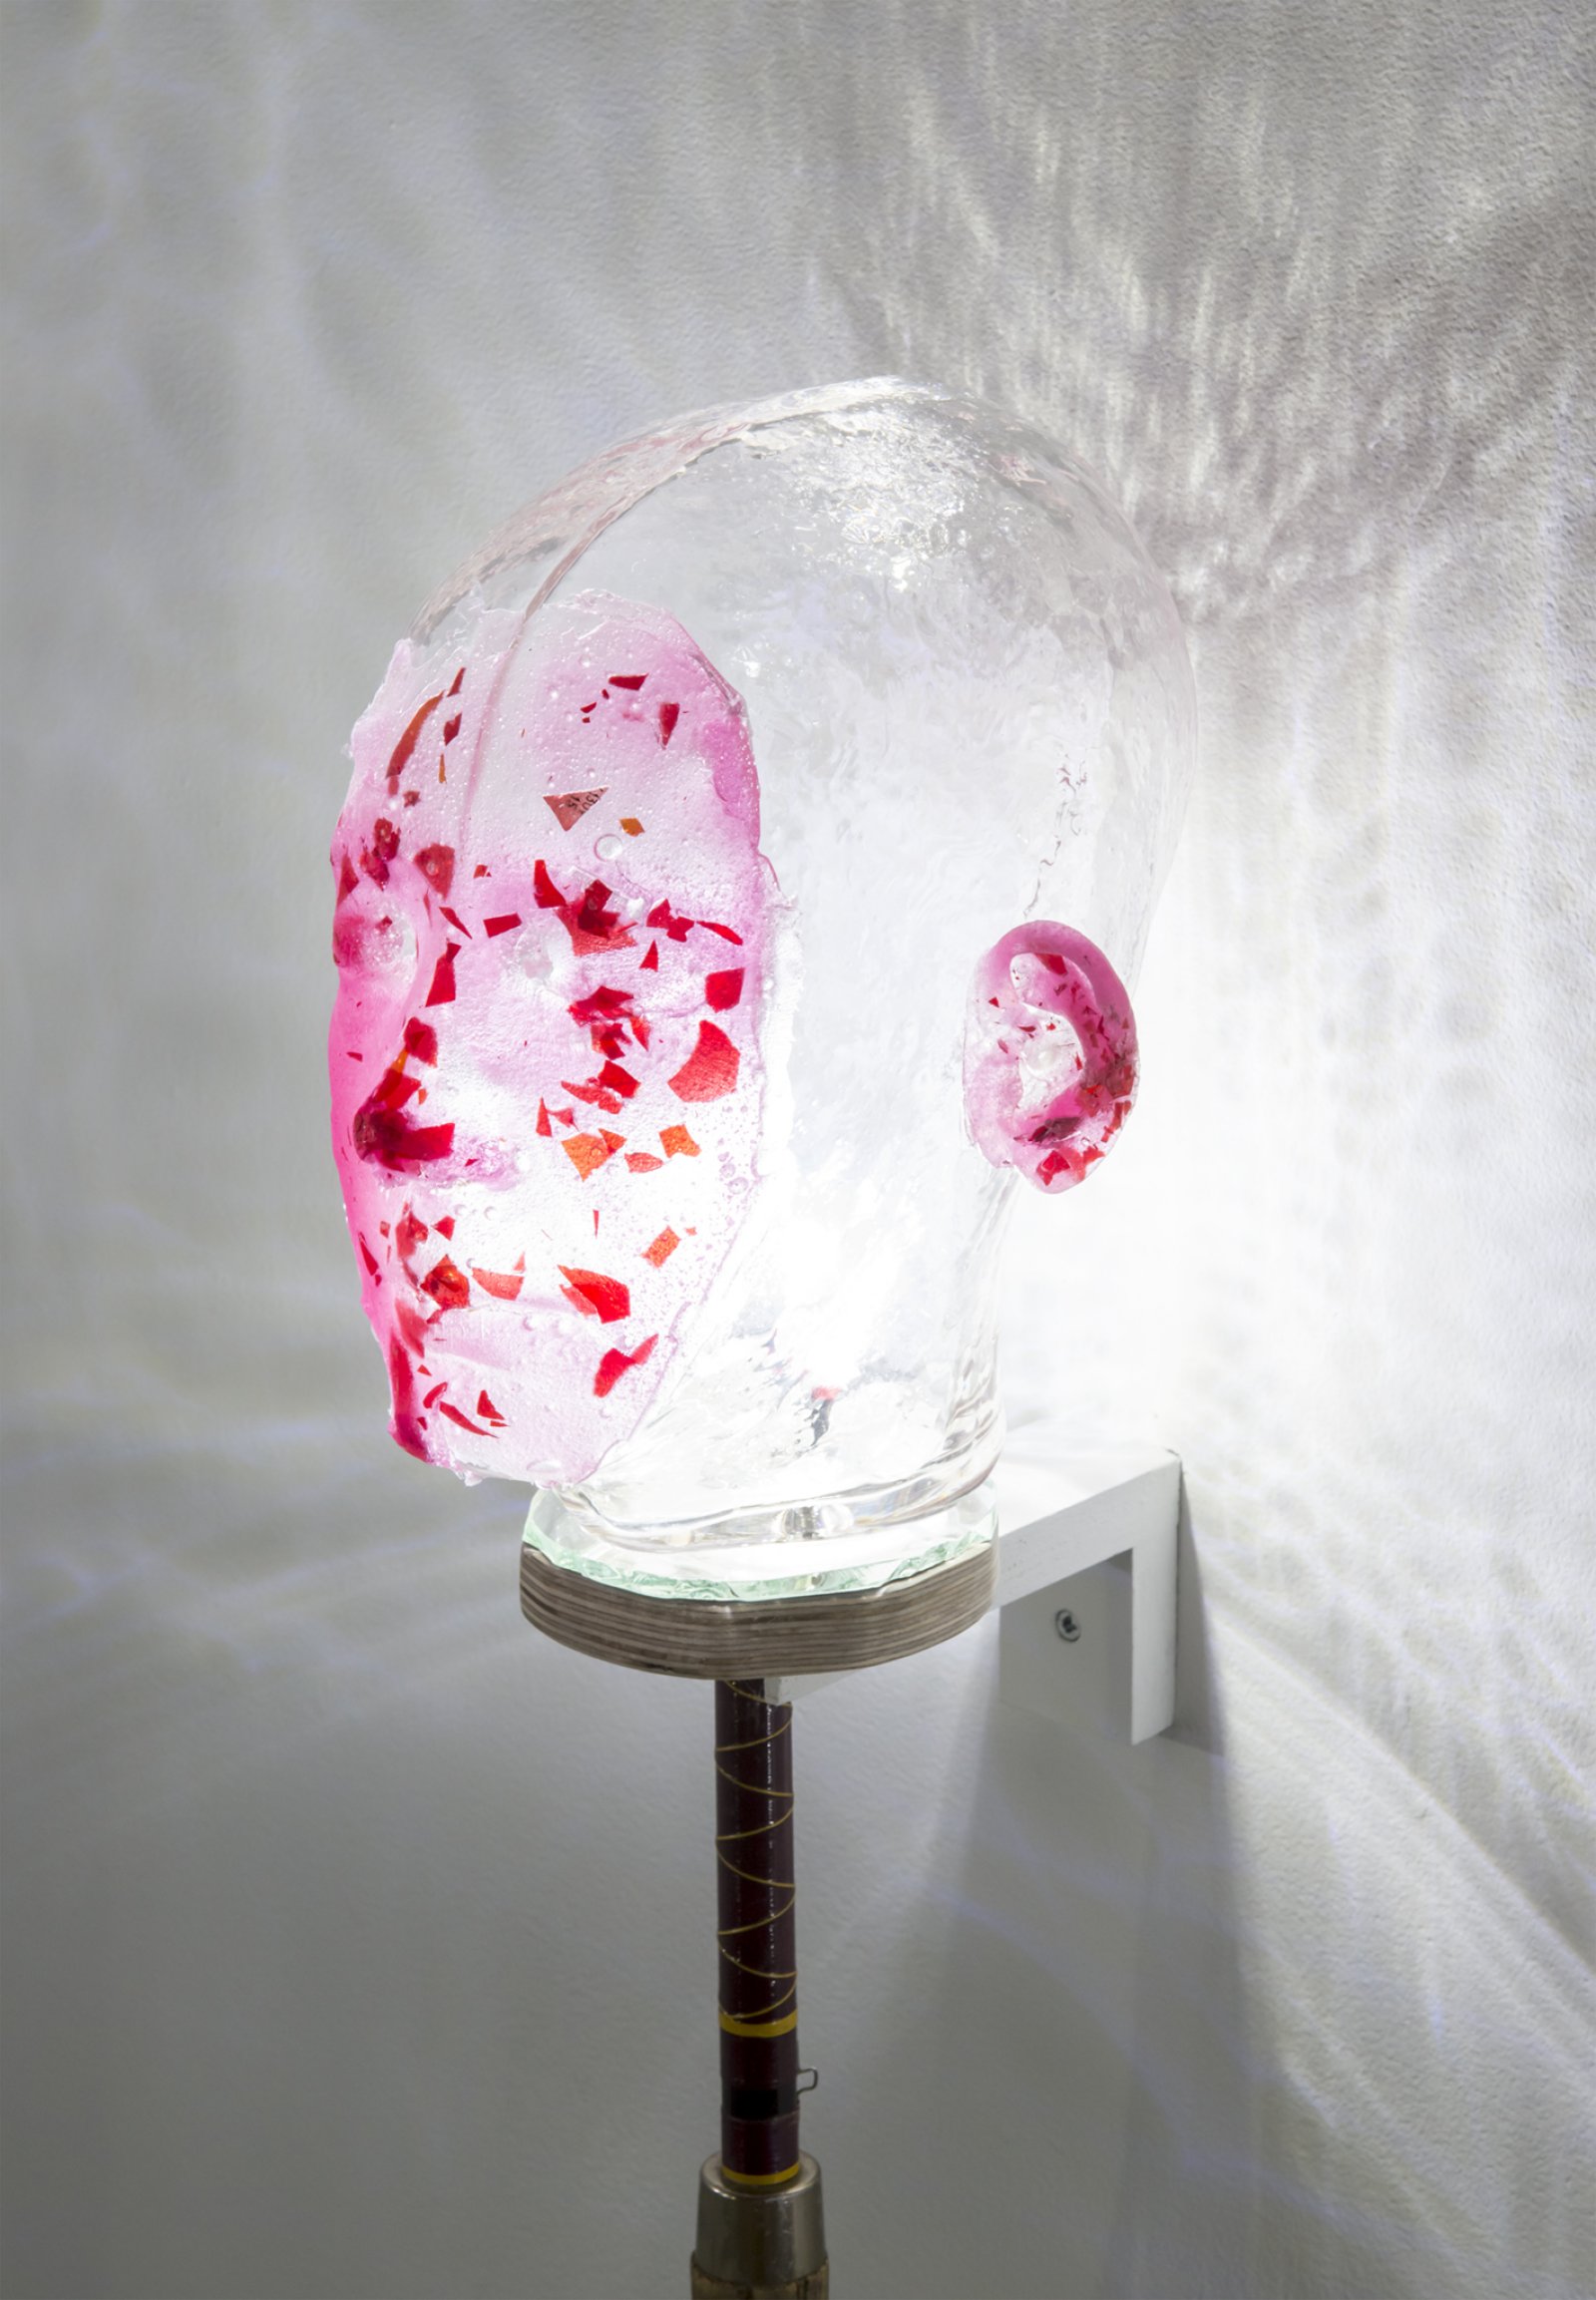 ​Julia Feyrer, Witnesses (detail), 2018, broken bulb, fishing rod, handblown glass, dyed silicone, LED lights, 38 x 7 x 10 in. (97 x 18 x 25 cm) by Julia Feyrer